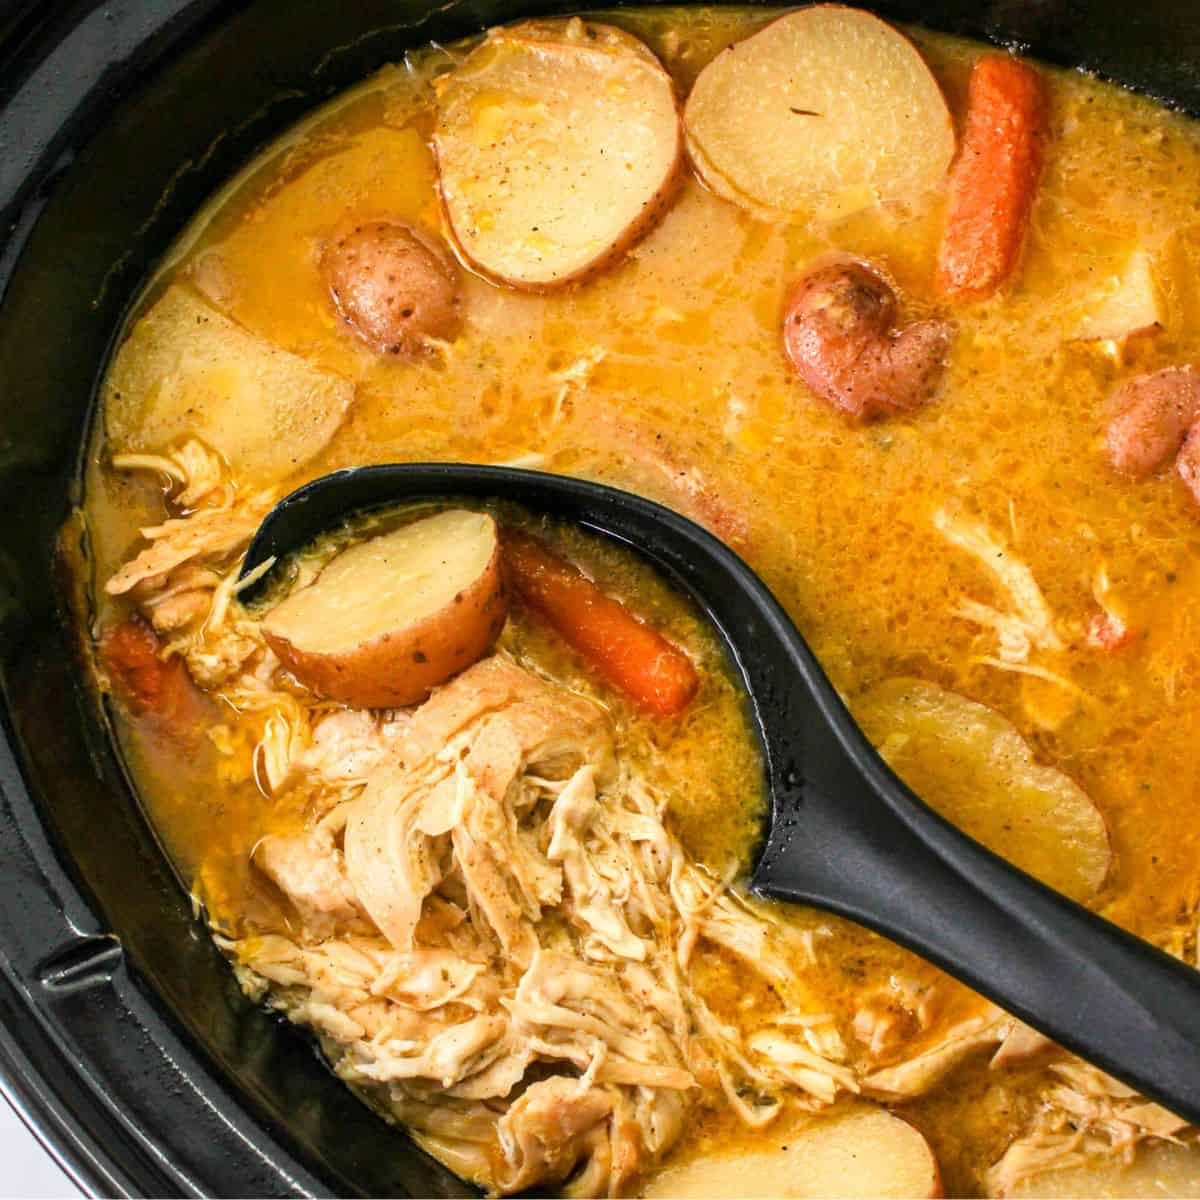 Slow cooker chicken and potatoes with cream of chicken soup.